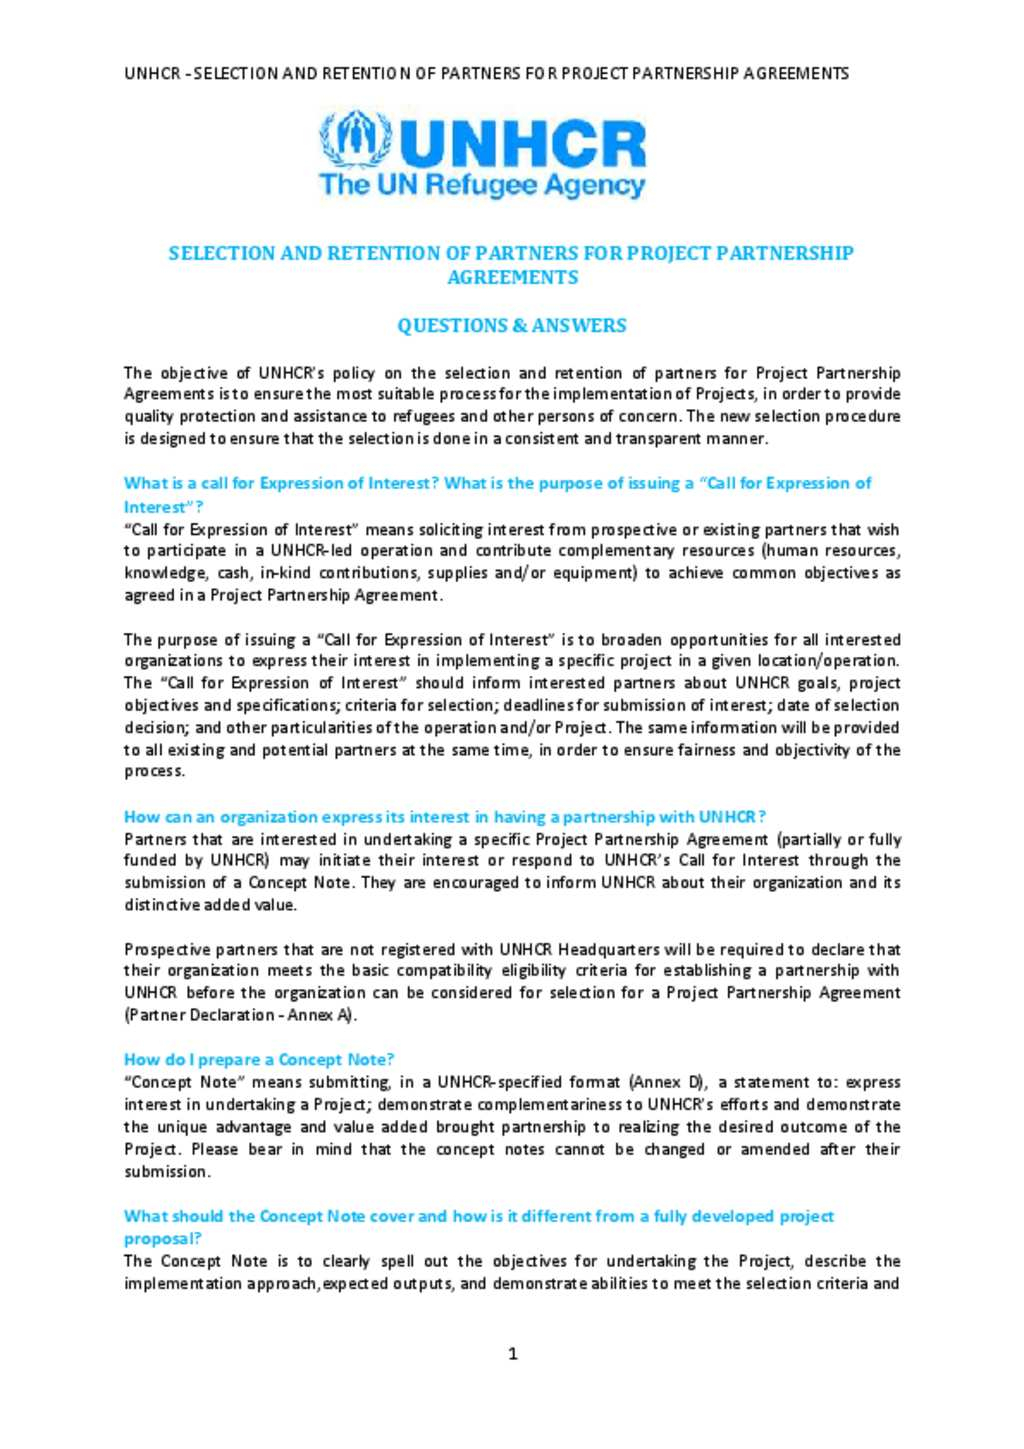 Partnership Agreement Pdf Download Document Selection And Retention Of Partners For Project